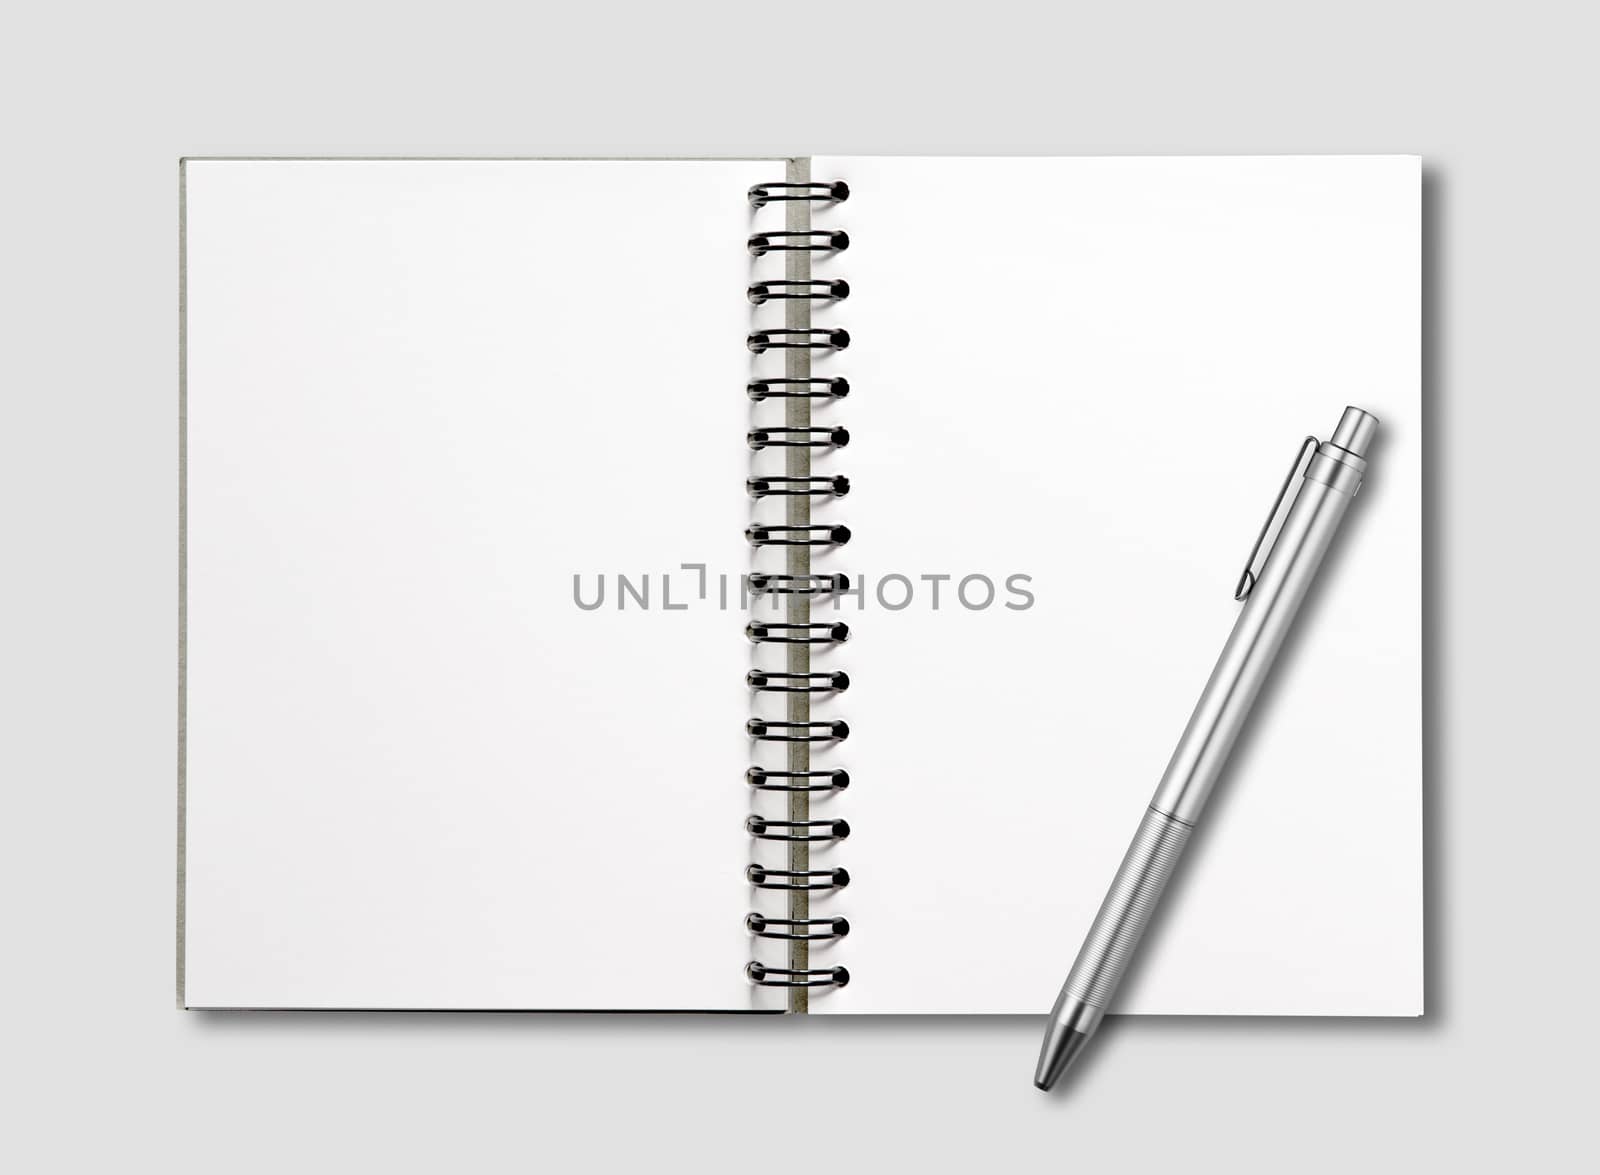 Blank open spiral notebook and pen mockup isolated on grey